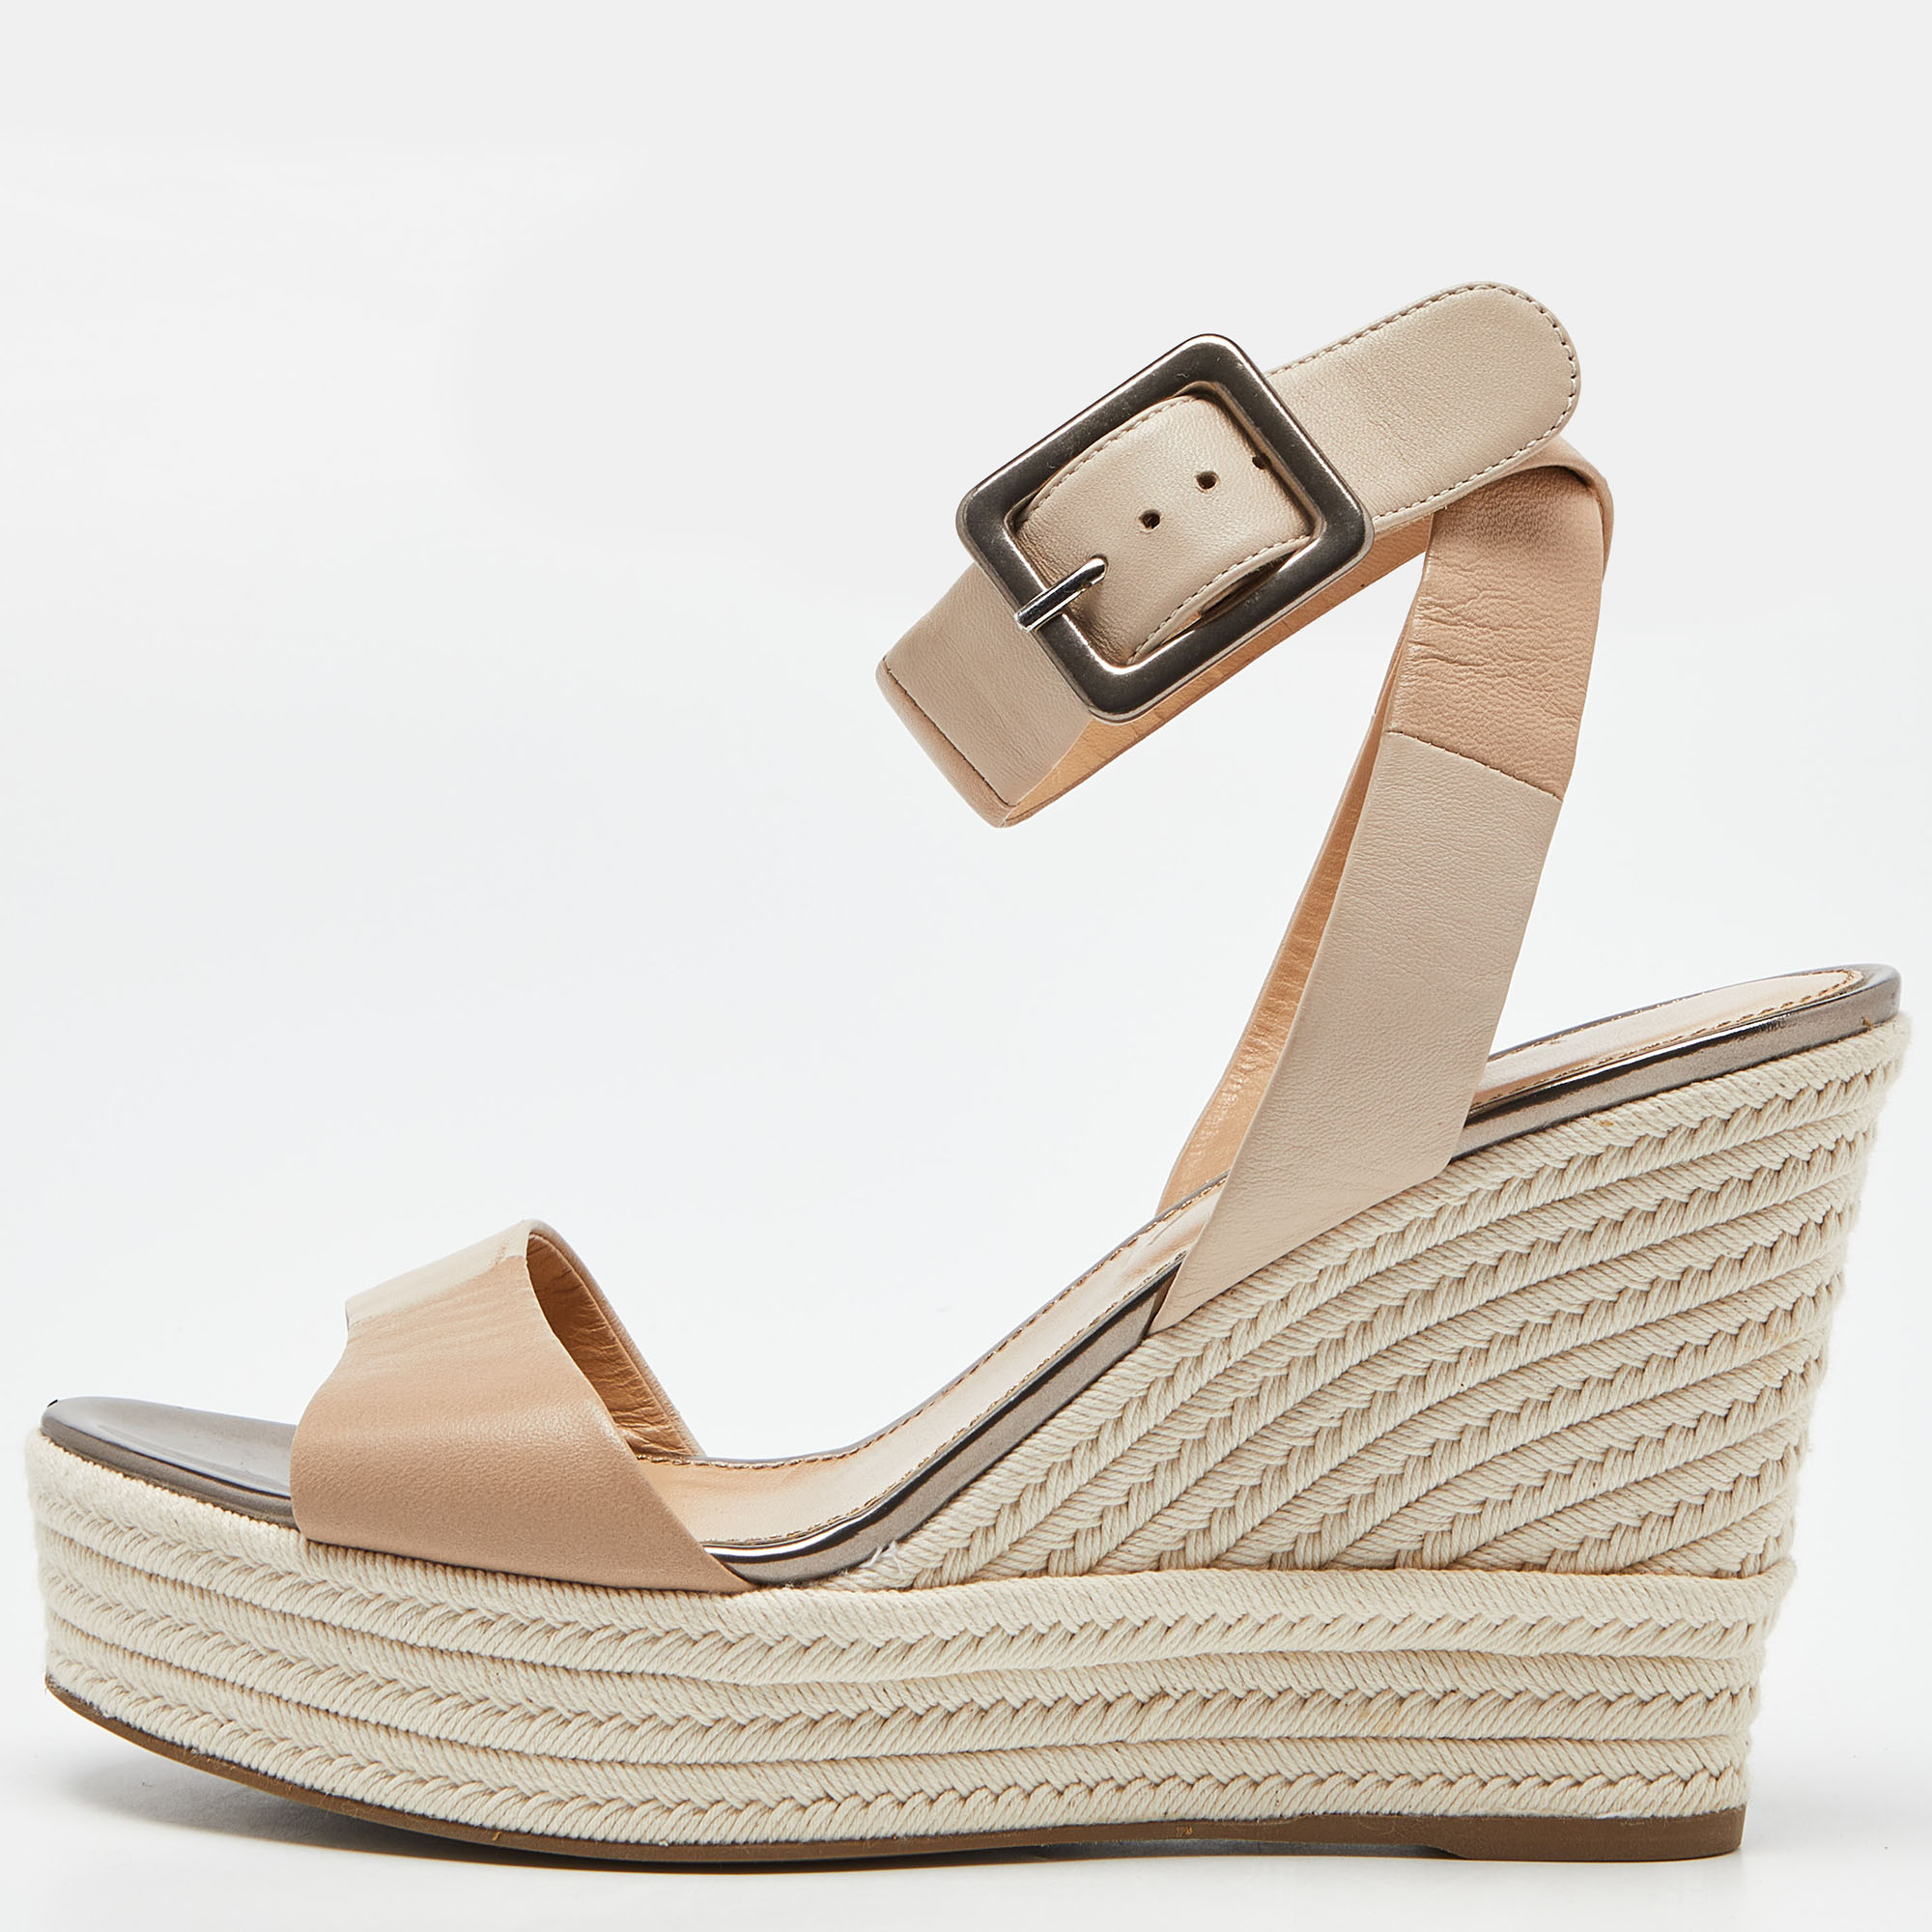 Sergio rossi two tone leather espadrille wedge ankle wrap sandals size 39